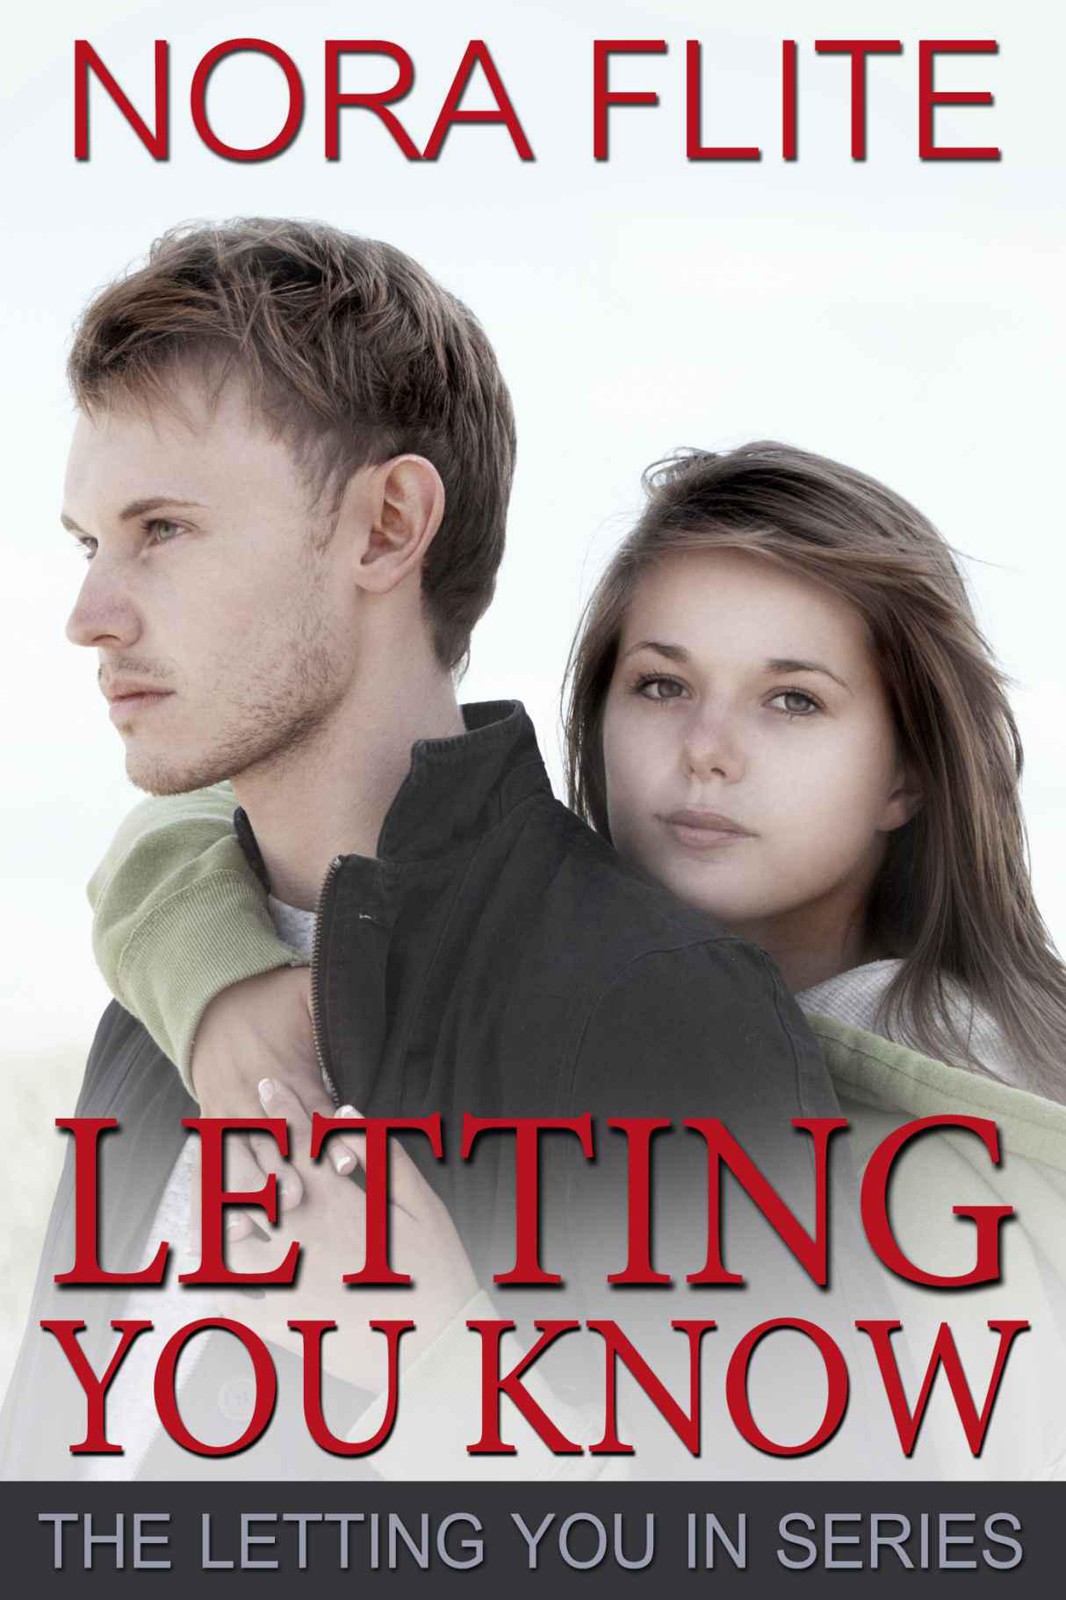 Letting You Know by Nora Flite